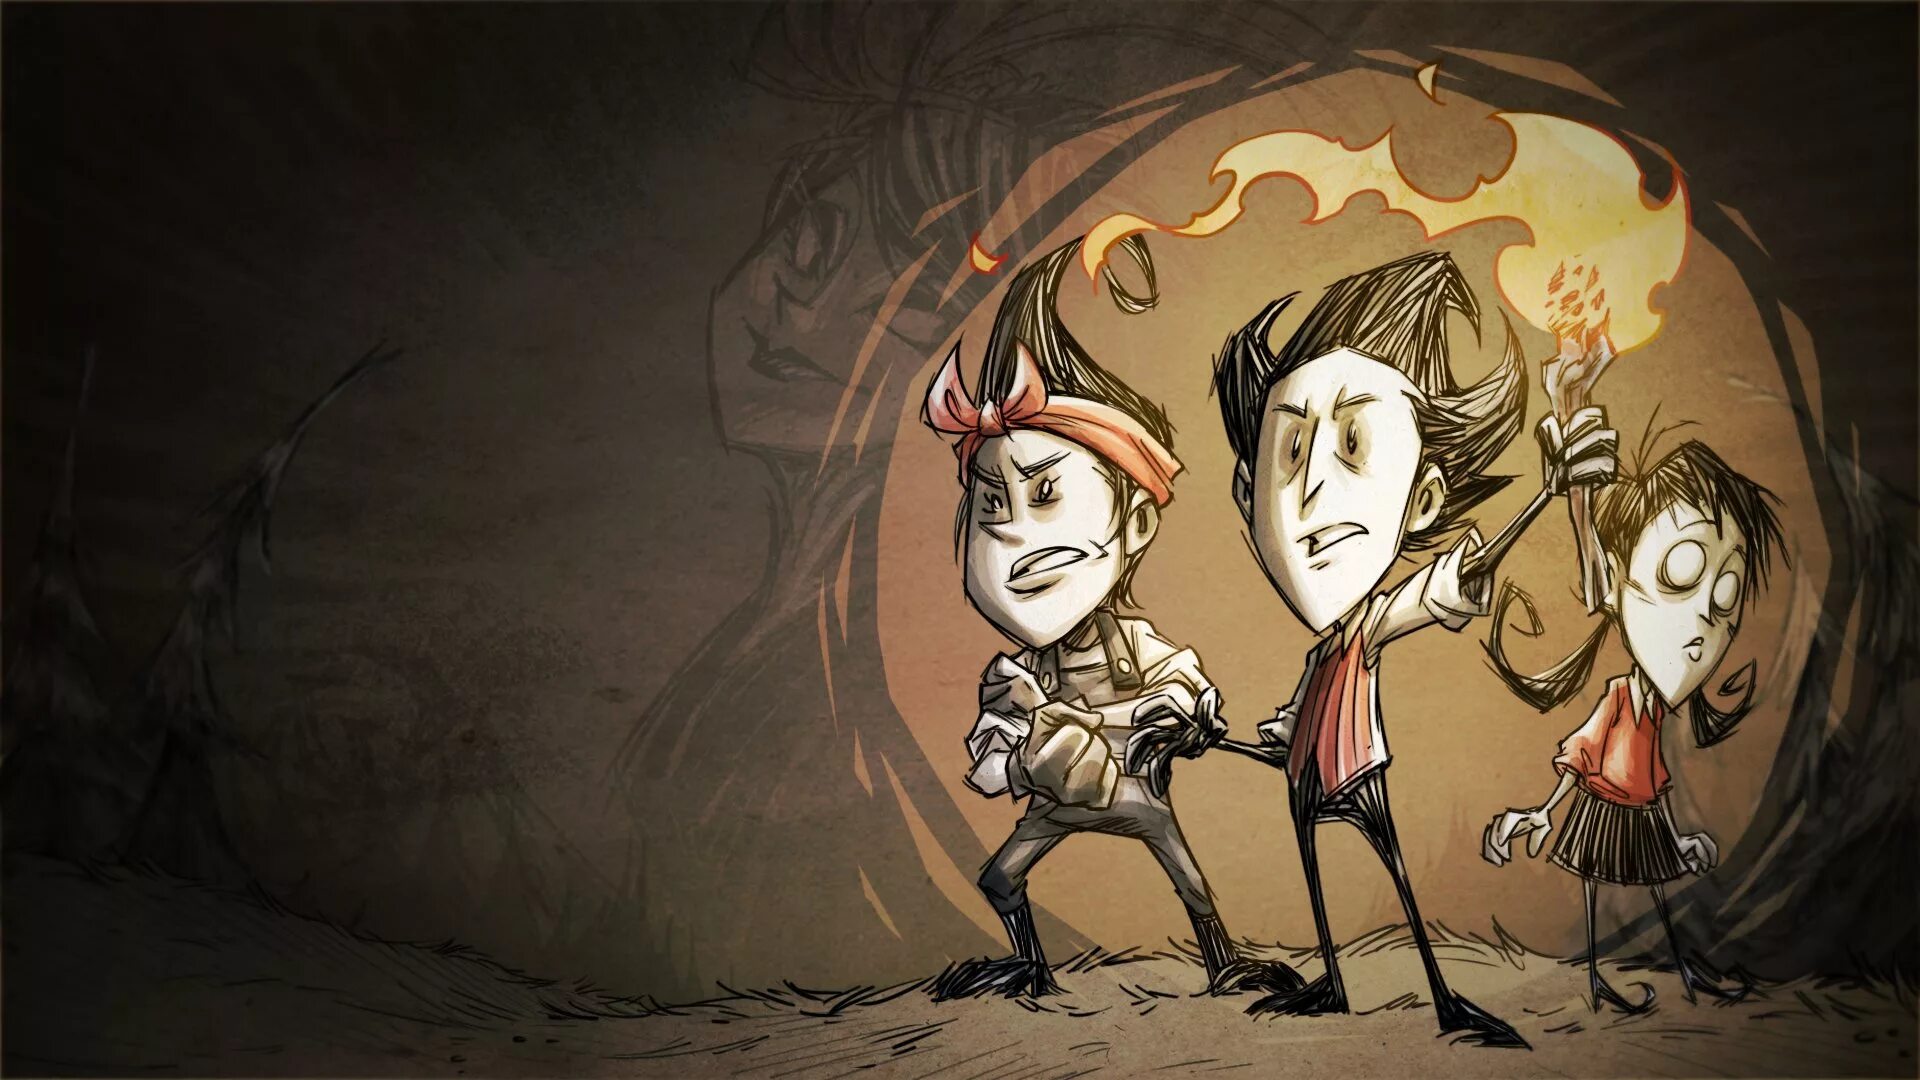 Don t start new. Don t Starve together. Don't Starve Вайнона. Don't Starve together стрим. Донт старв Гамлет.